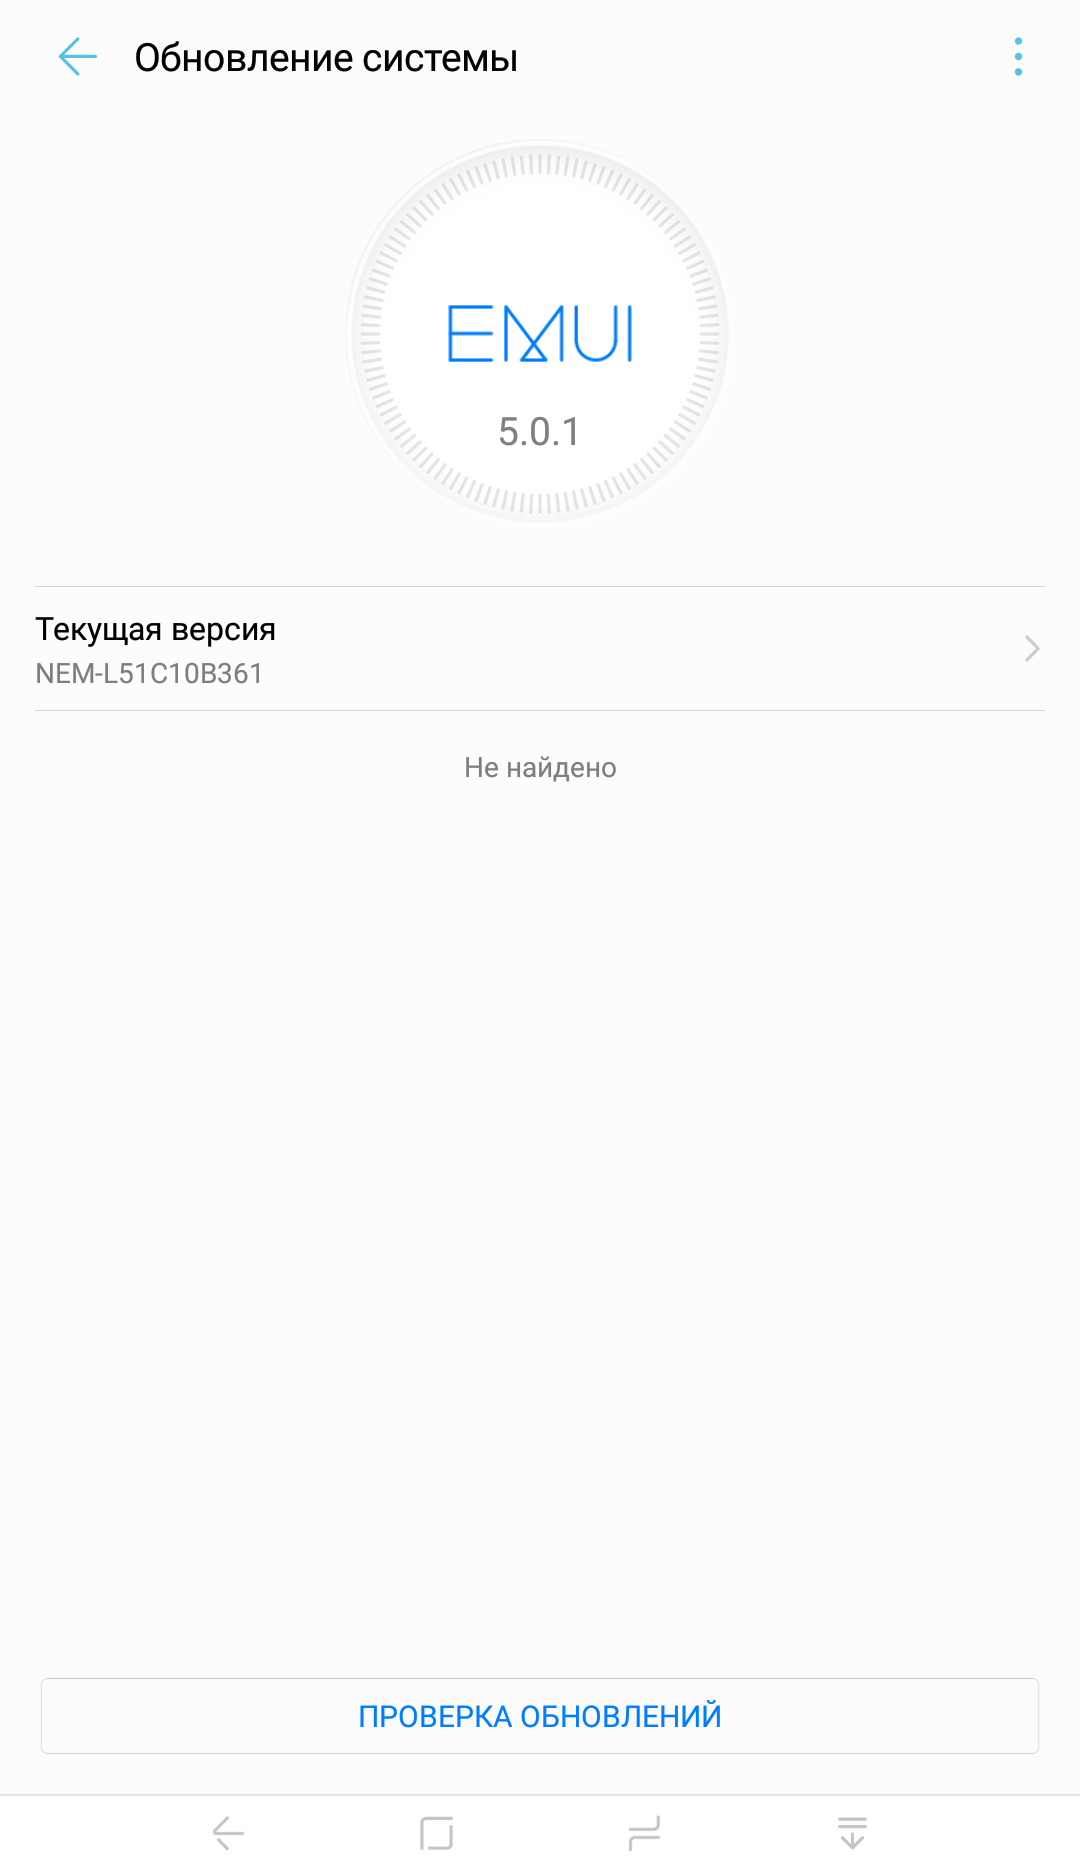 HUEWAYA support - My, Chinese smartphones, Android, Everything is fine, Mat, Longpost